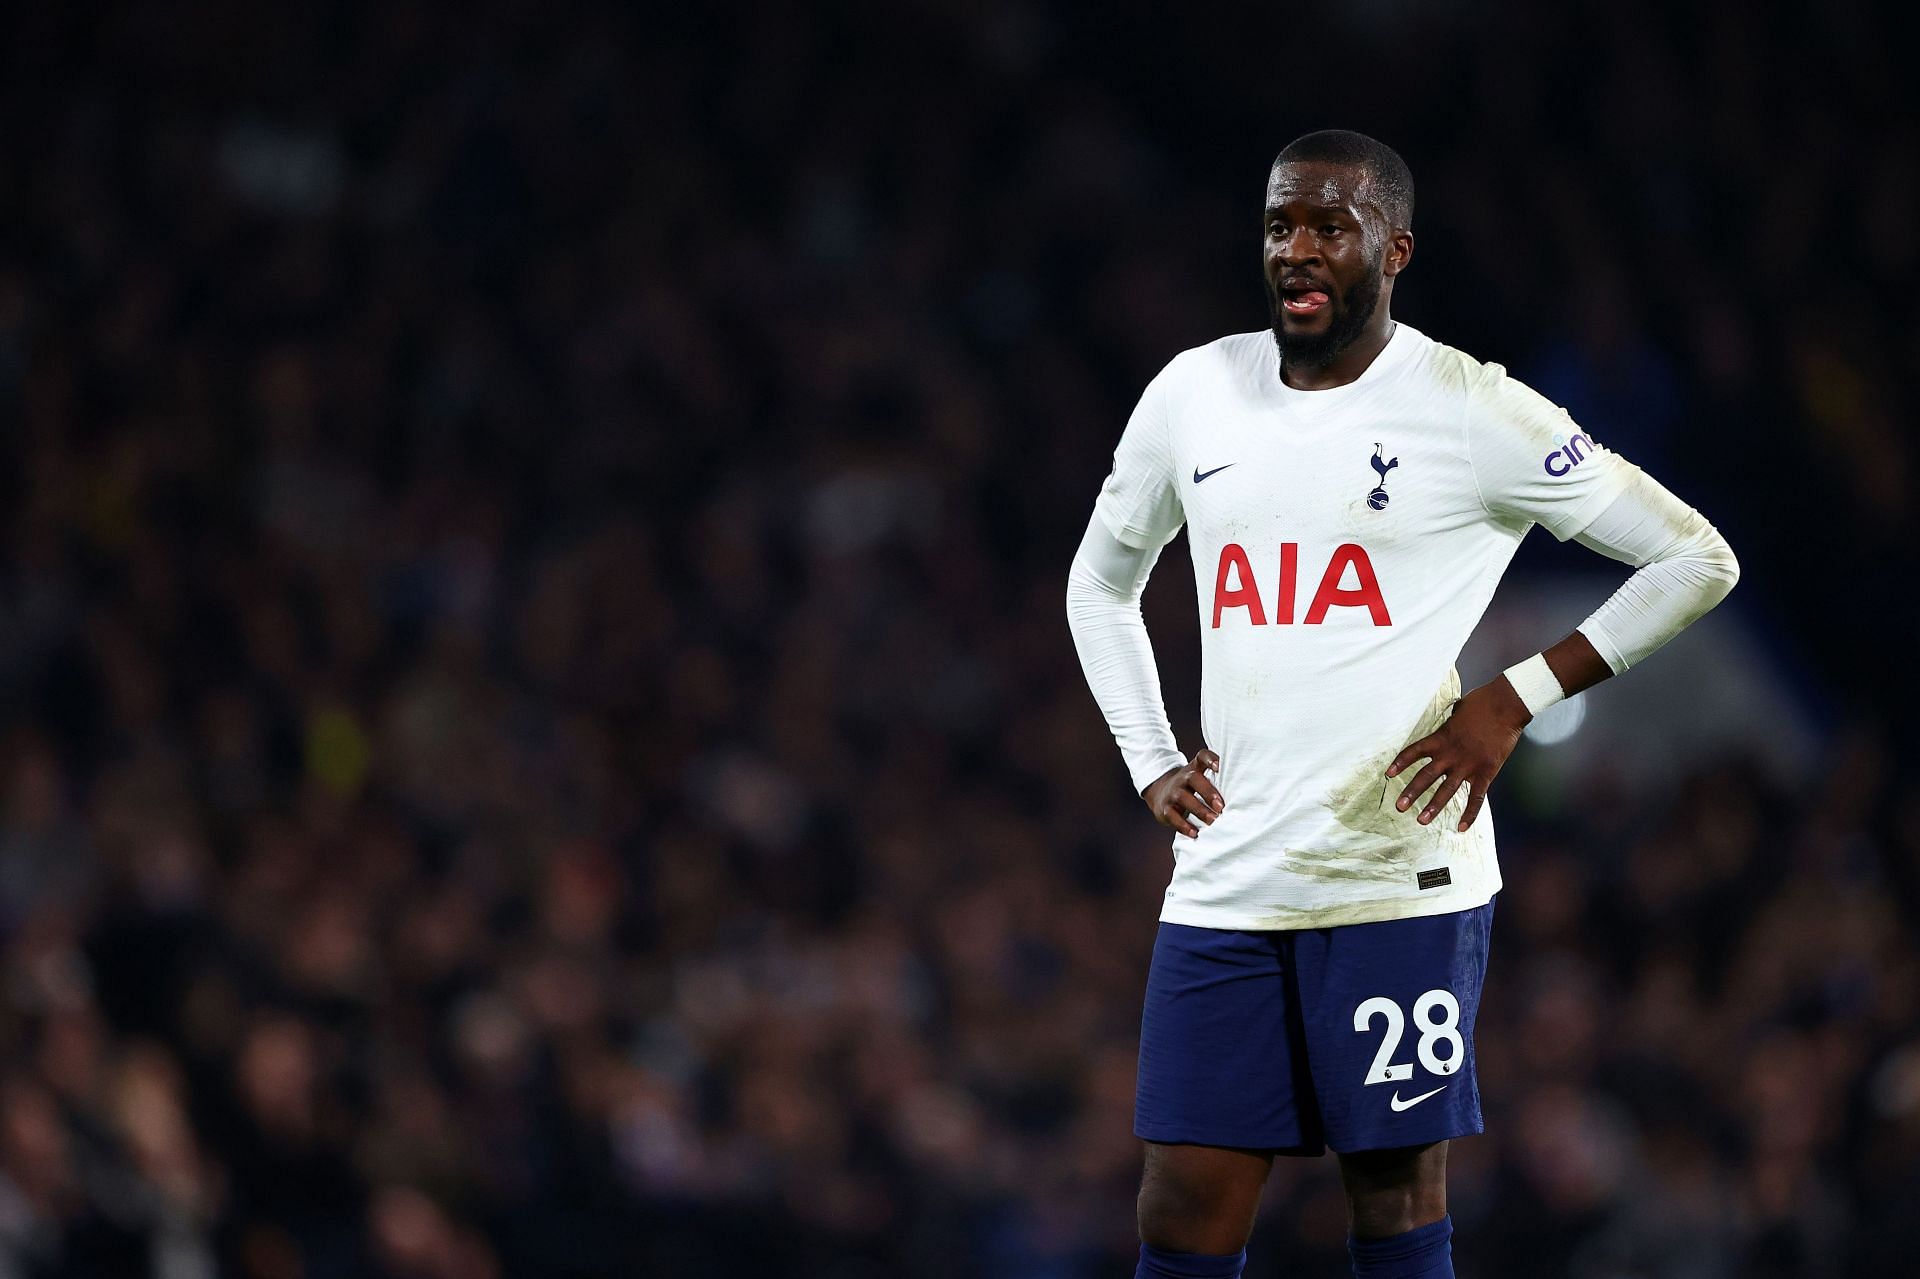 PSG are unlikely to sign Tanguy Ndombele this month.